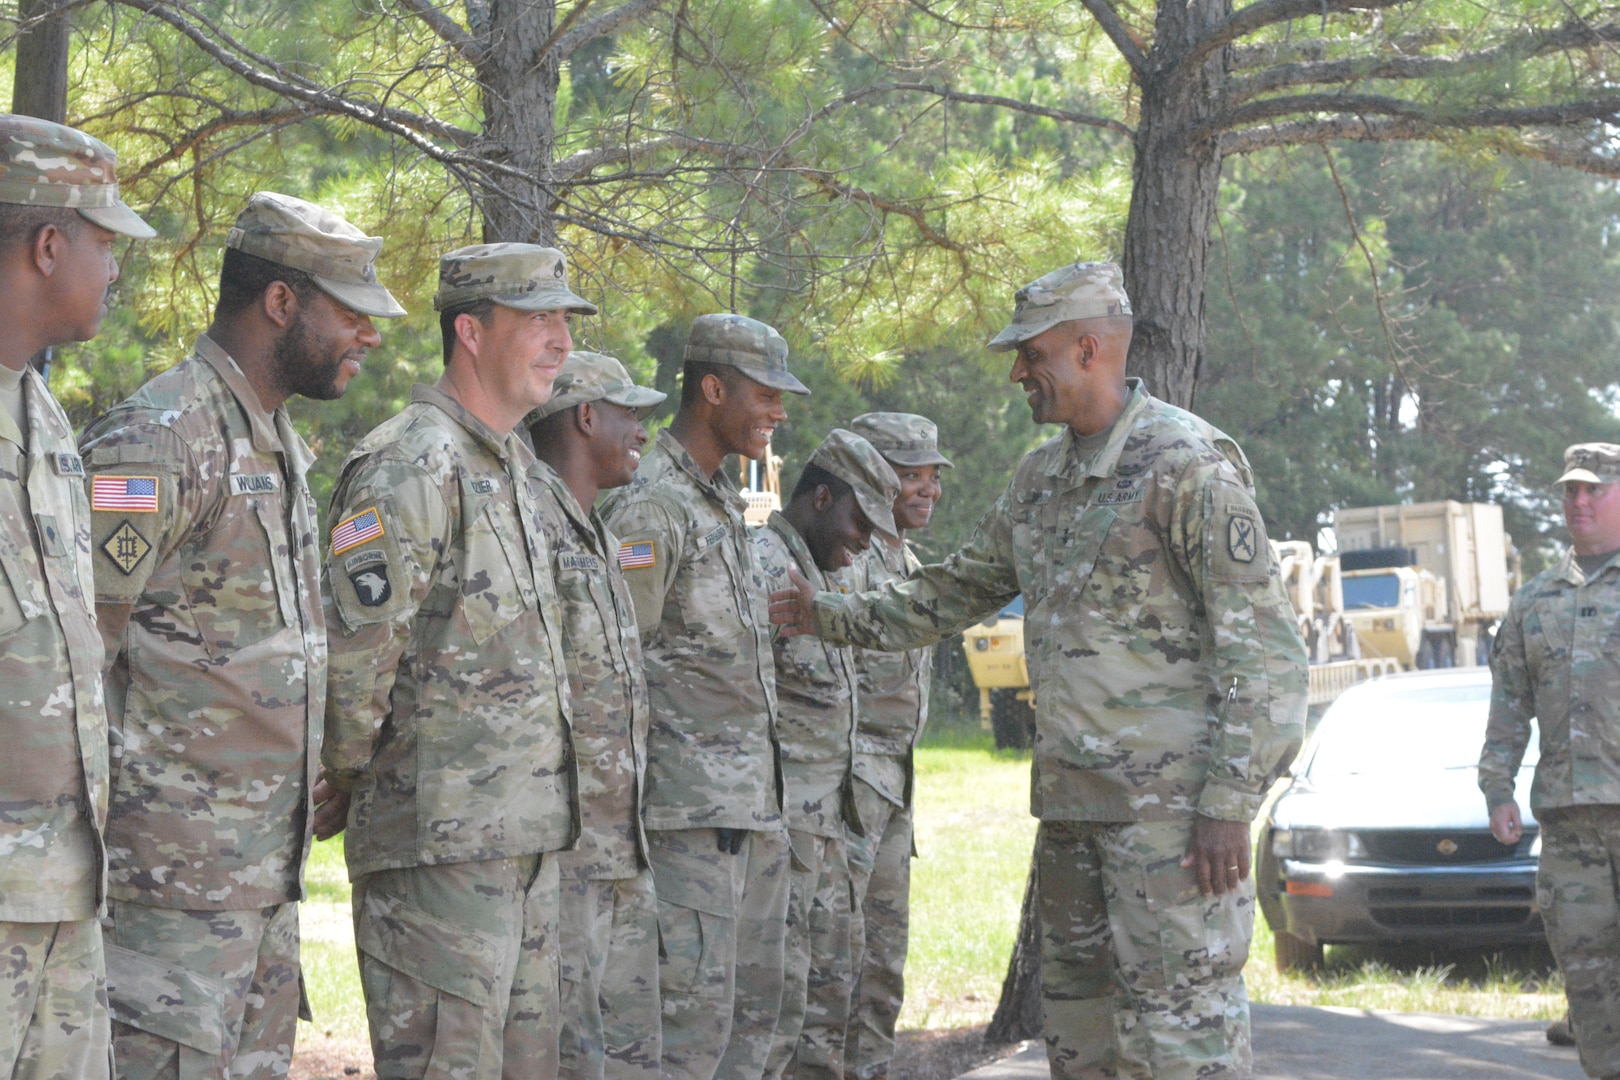 Maj. Gen. Gary M. Brito, center right, Maneuver Center of Excellence and Fort Benning commanding general, talks with Soldiers of the 877th Engineer Company, 878th Engineer Battalion, Georgia Army National Guard, Sept. 13. U.S. Army Garrison Fort Benning and the Georgia Army National Guard worked for two weeks to demolish dilapidated buildings, providing the National Guard Soldiers mission-essential training.